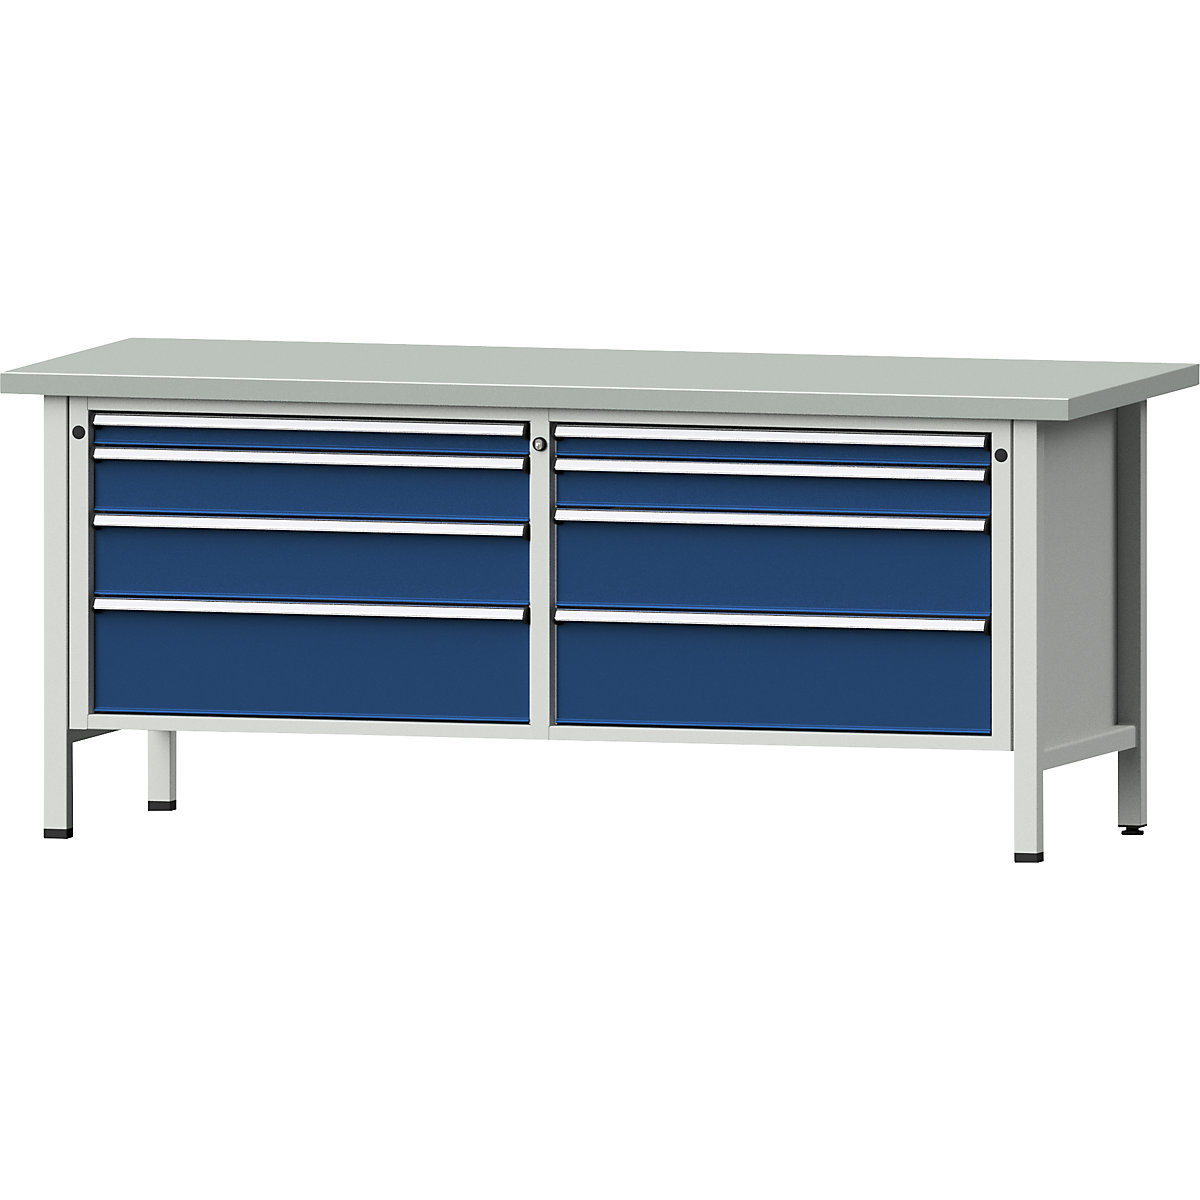 Workbenches 2000 mm wide, frame construction – ANKE, 8 drawers, sheet steel covered worktop, height 840 mm-11